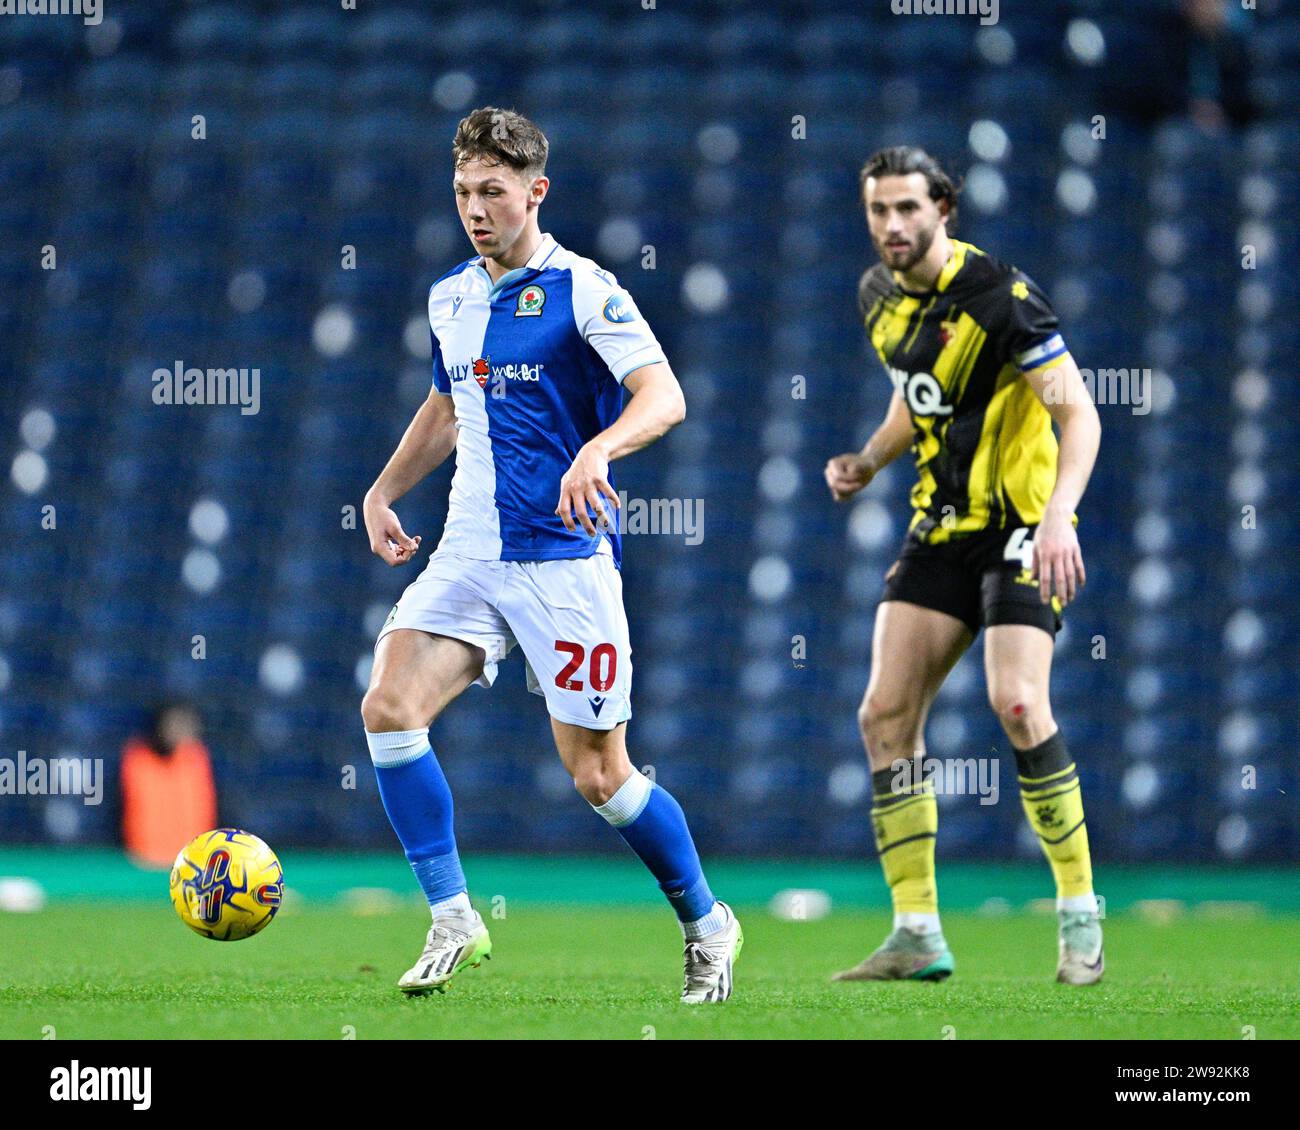 Harry Leonard #20 of Blackburn Rovers drives on the ball, during the Sky Bet Championship match Blackburn Rovers vs Watford at Ewood Park, Blackburn, United Kingdom, 23rd December 2023  (Photo by Cody Froggatt/News Images) Stock Photo